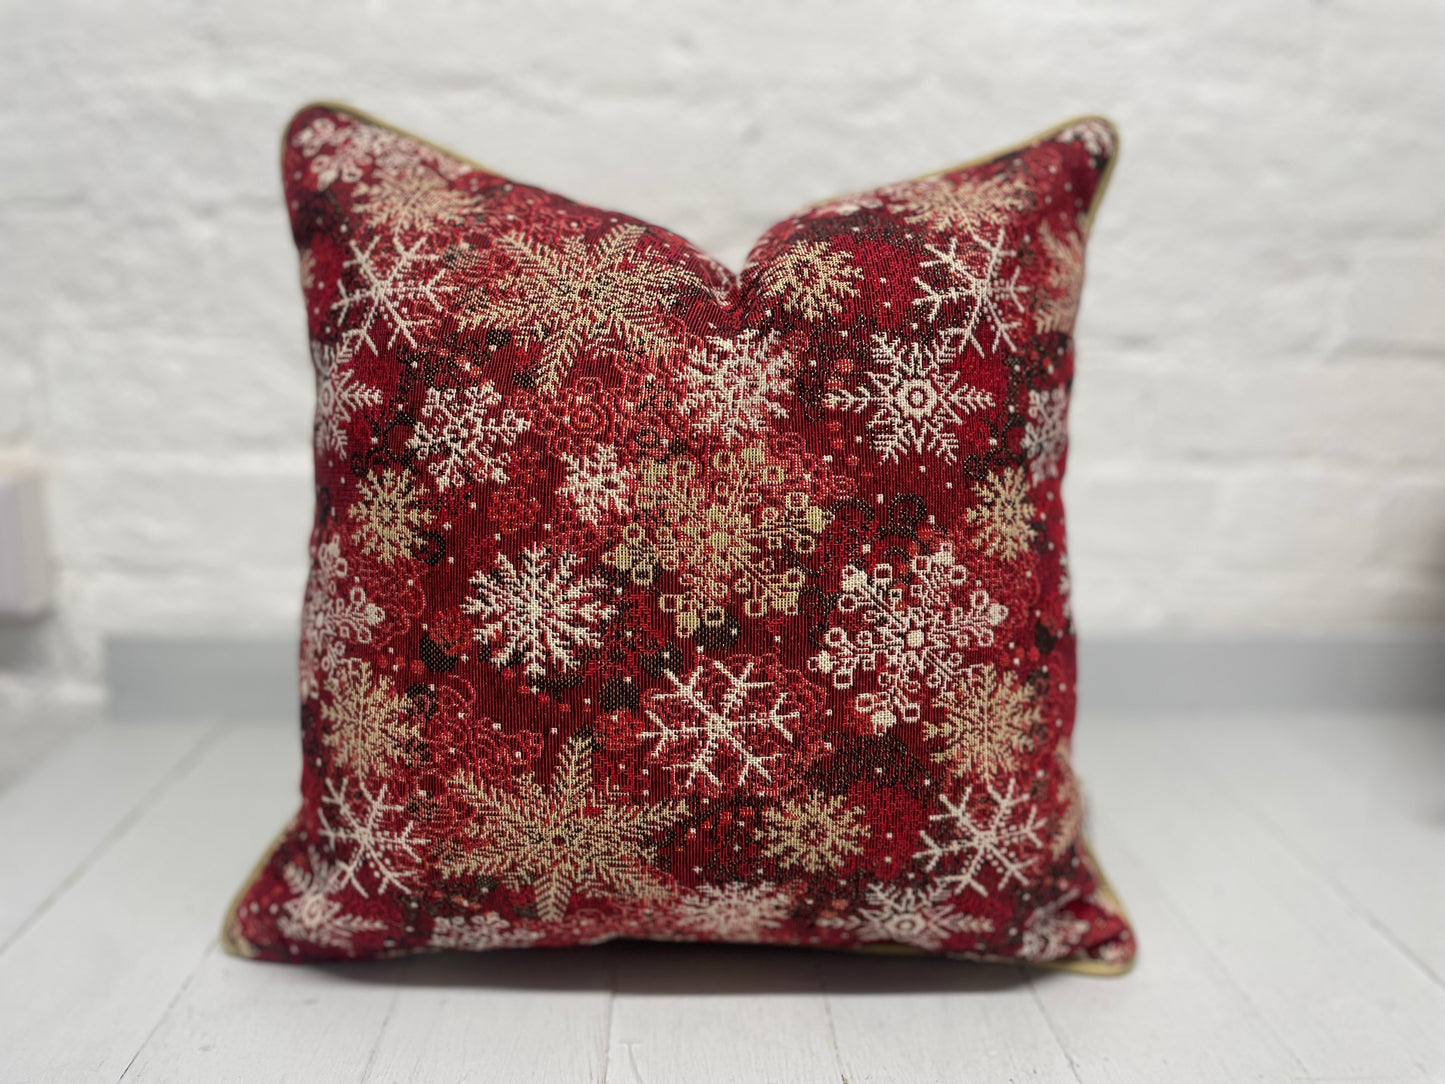 Snowflake Cushion with gold piping.